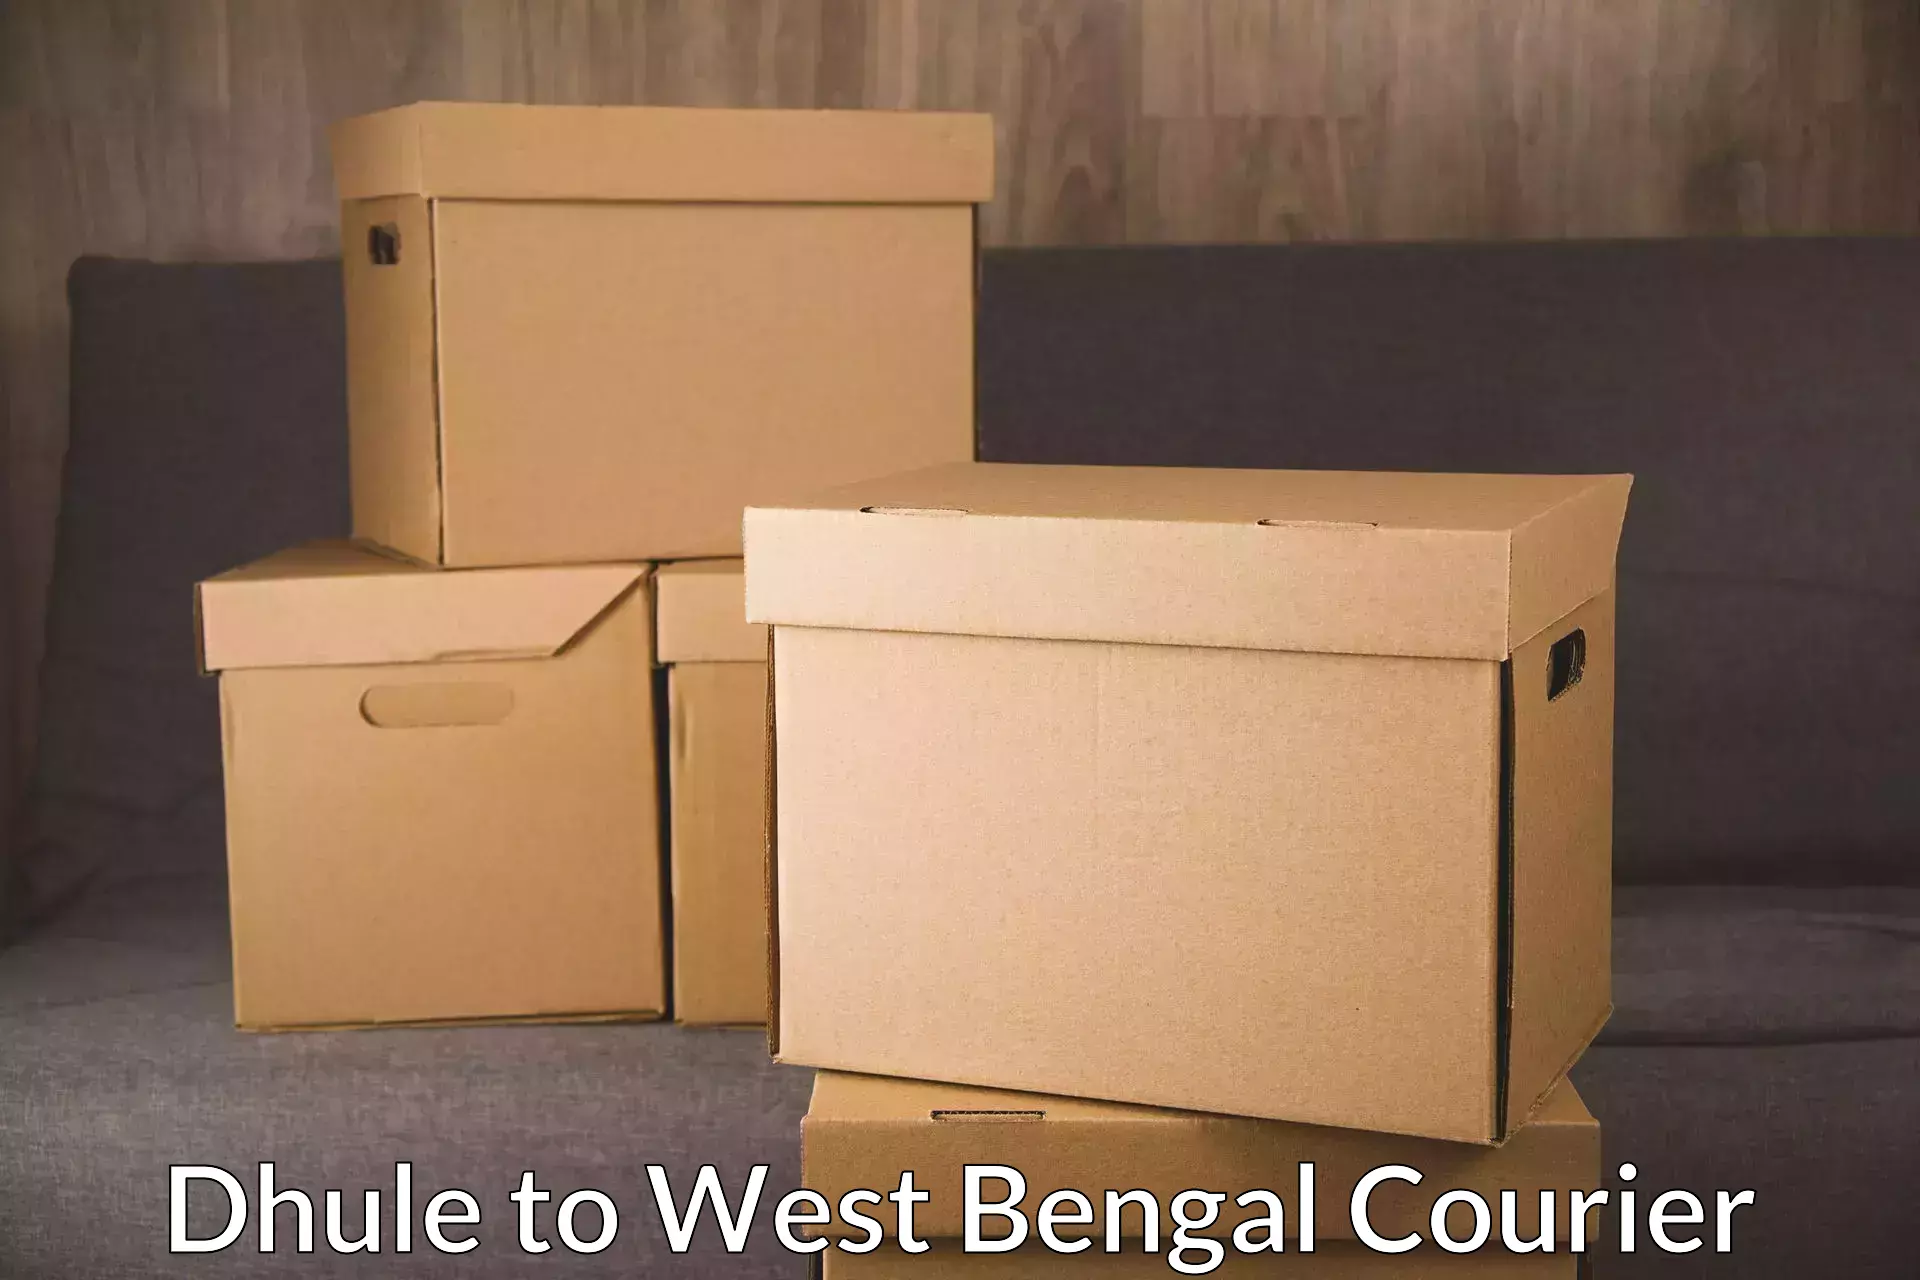 Parcel service for businesses Dhule to Murshidabad